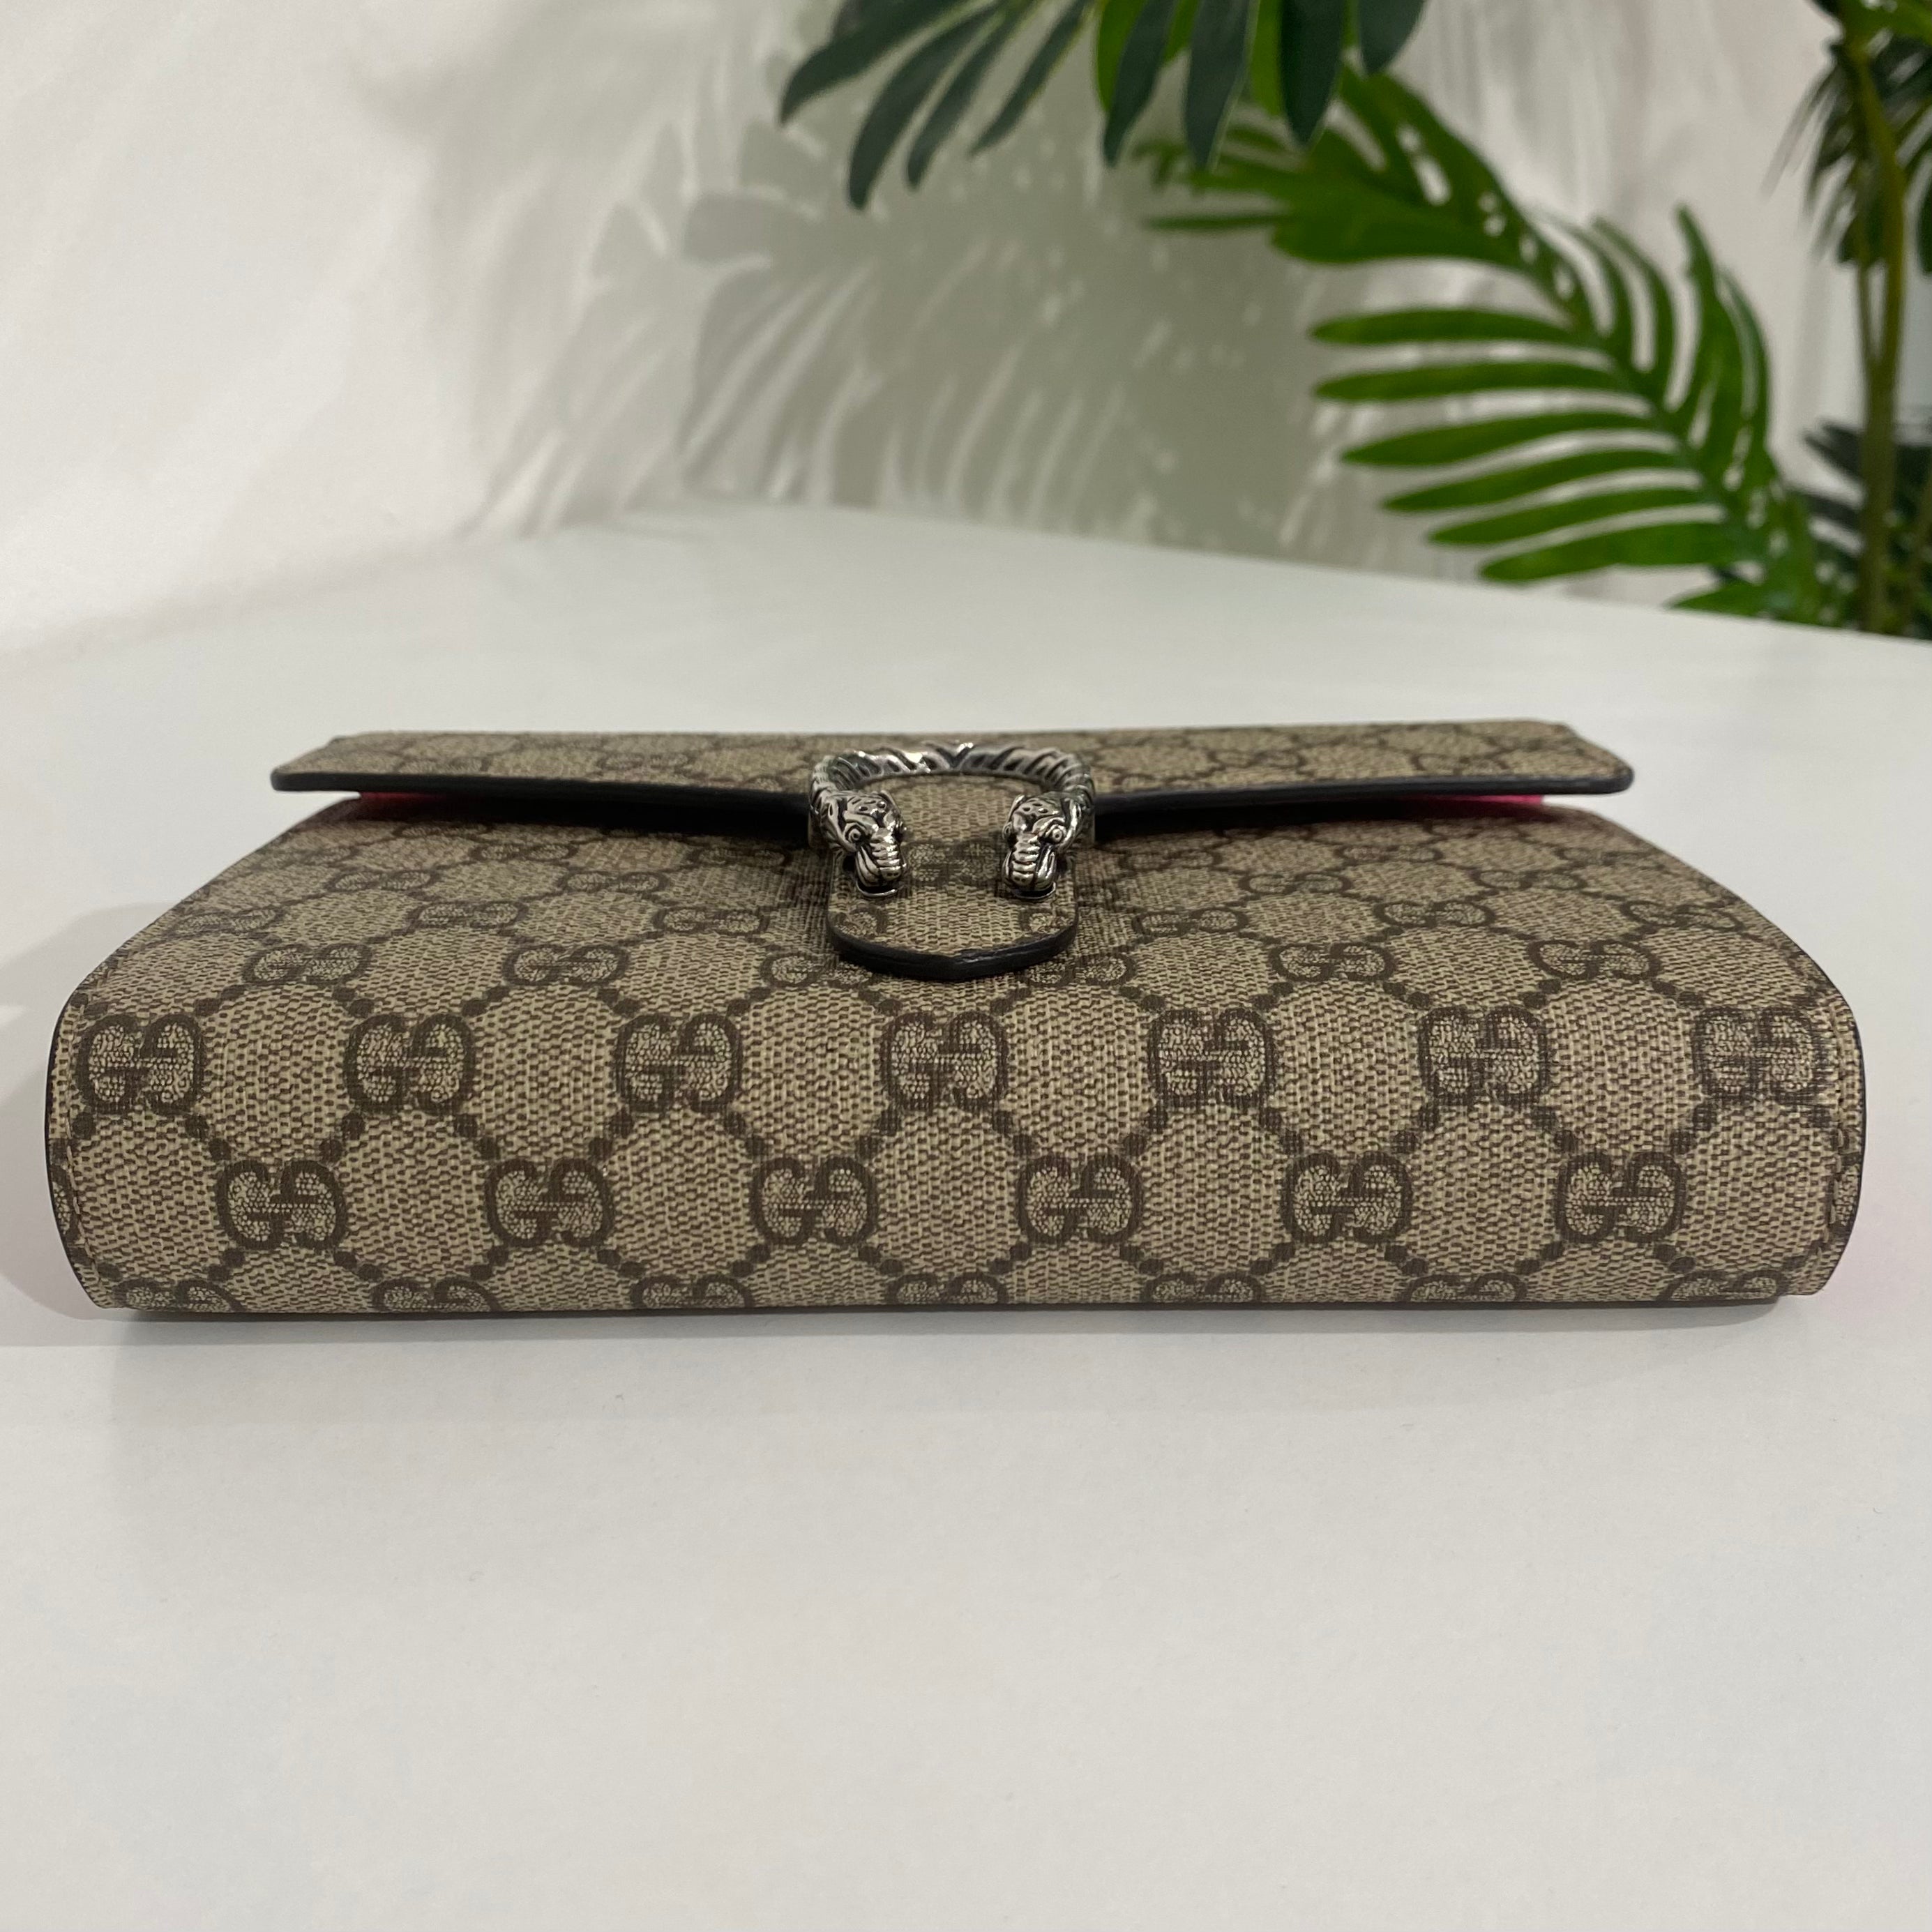 SOLD Authentic Gucci Dionysus woc (Can cod)